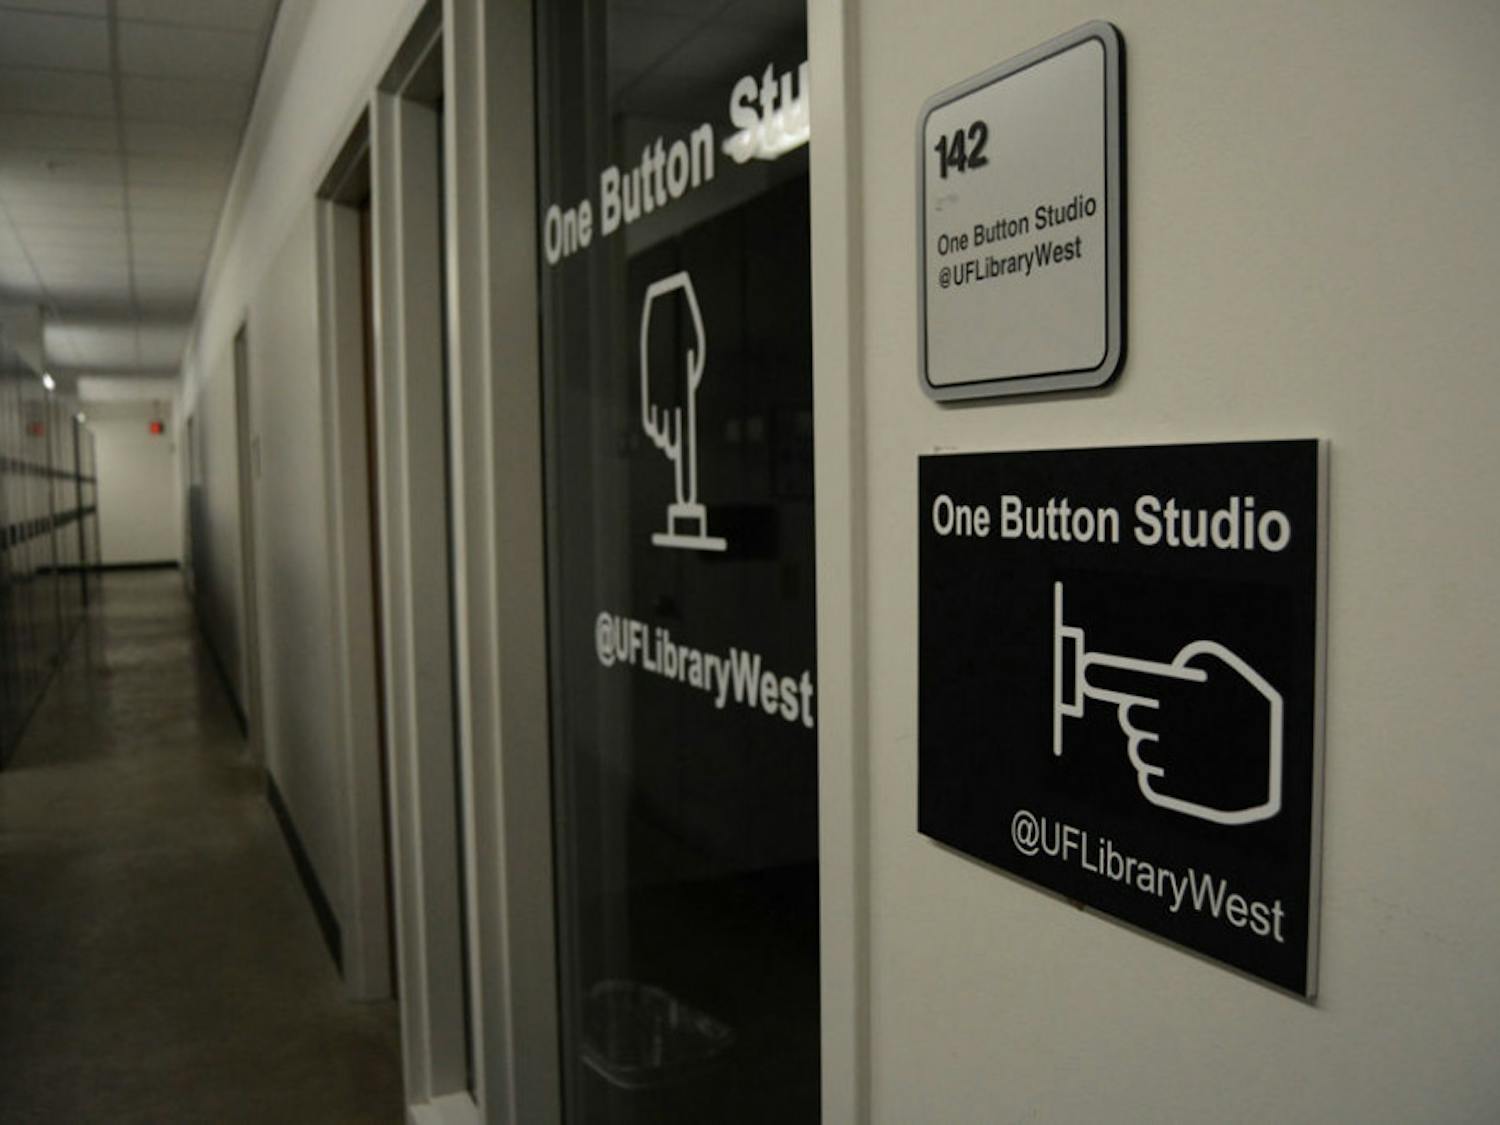 The new One Button Studio in Library West room 142 opened last week to students. To use $15,800 system, students plug an 8 GB flash drive into a video camera to compress and save the recording on the flash drive.